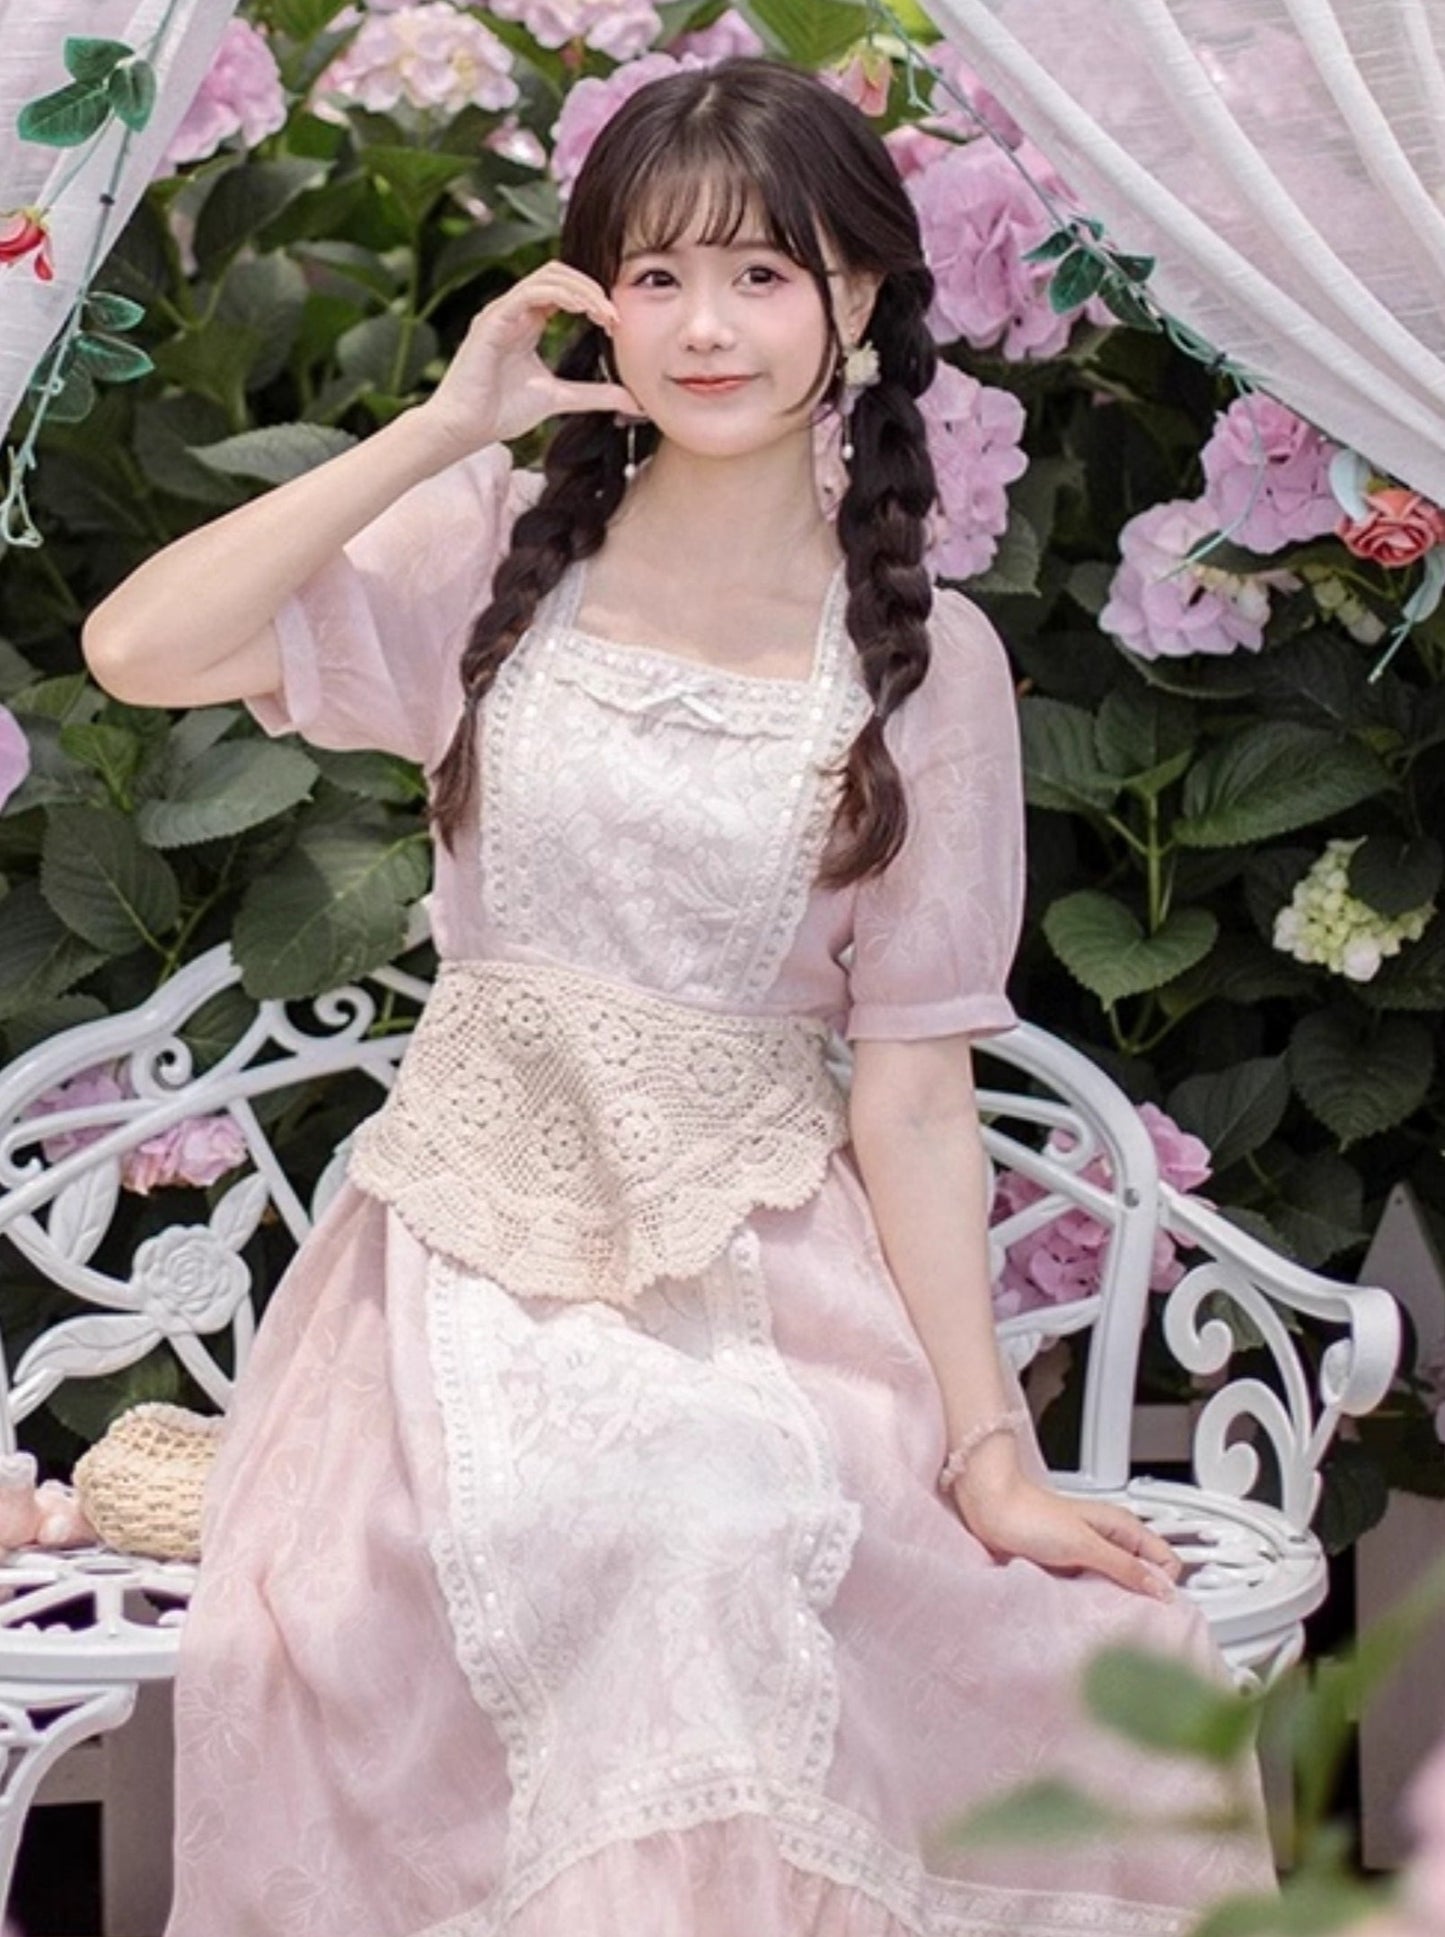 Article préférentiel : Heartbeat blooming forest dress 199 yuan a detail page to receive a coupon to place an order